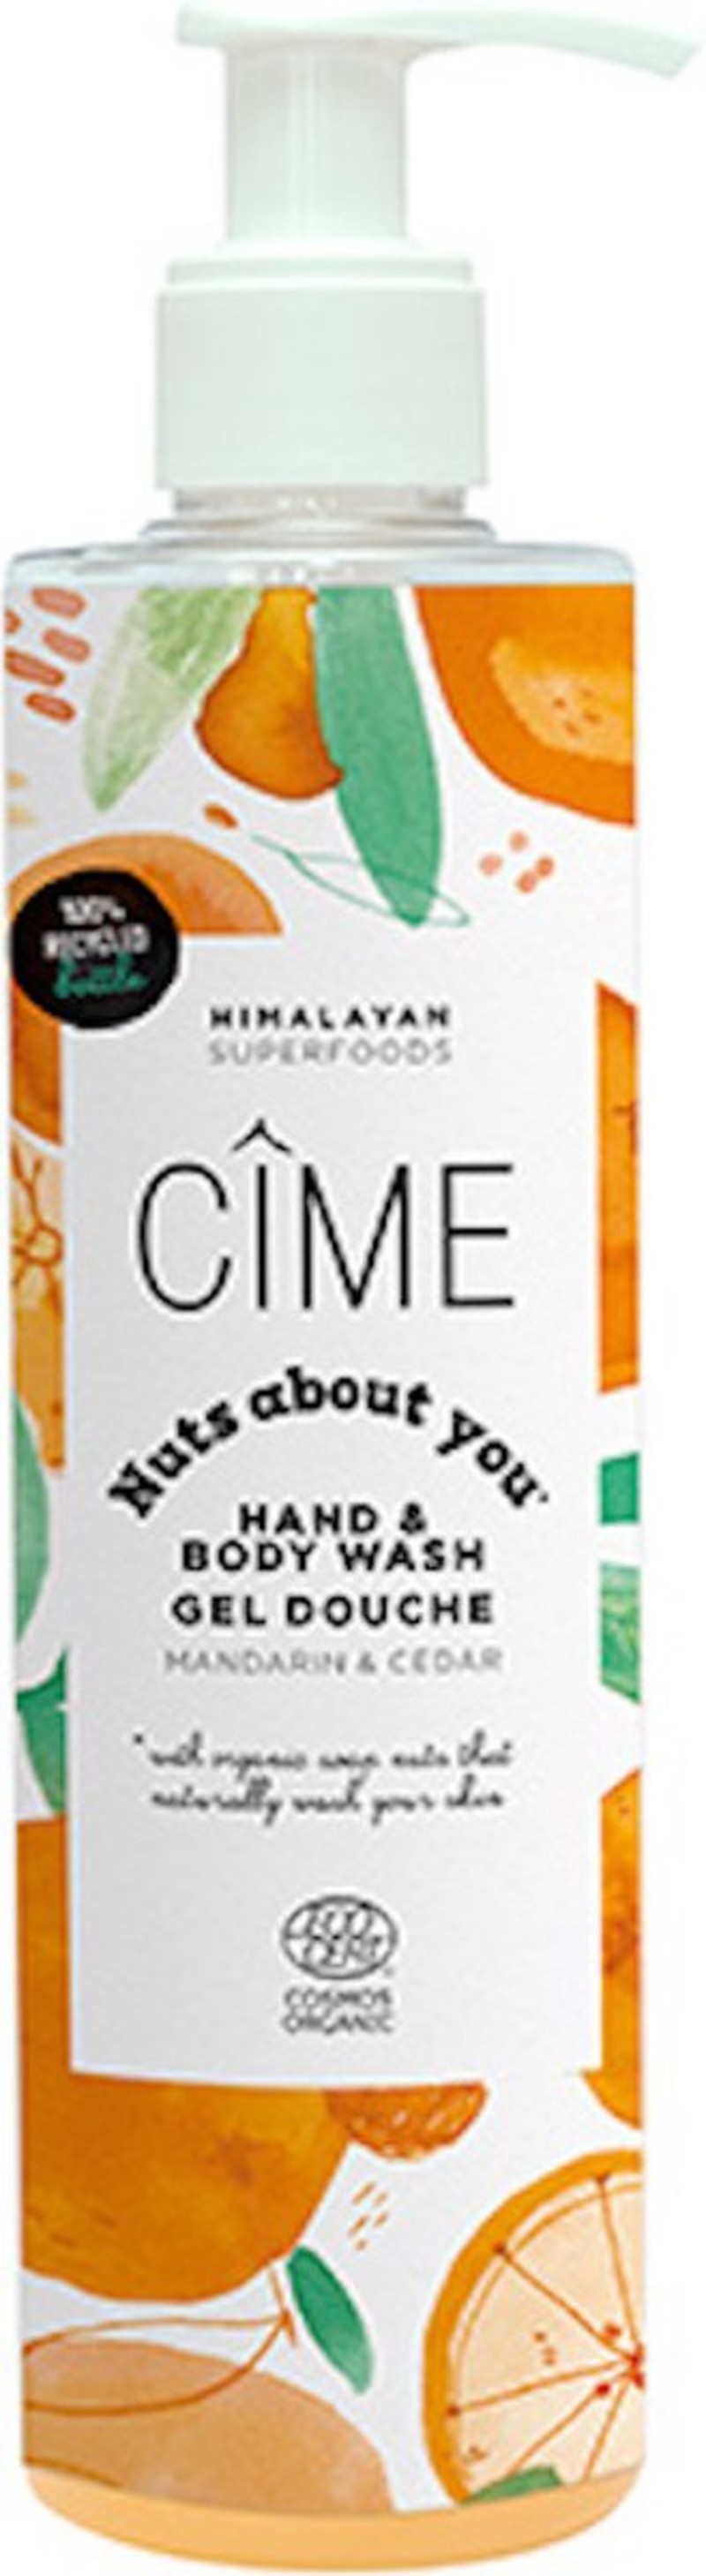 CÎME - Nuts About You - hand & body wash - 290 ml